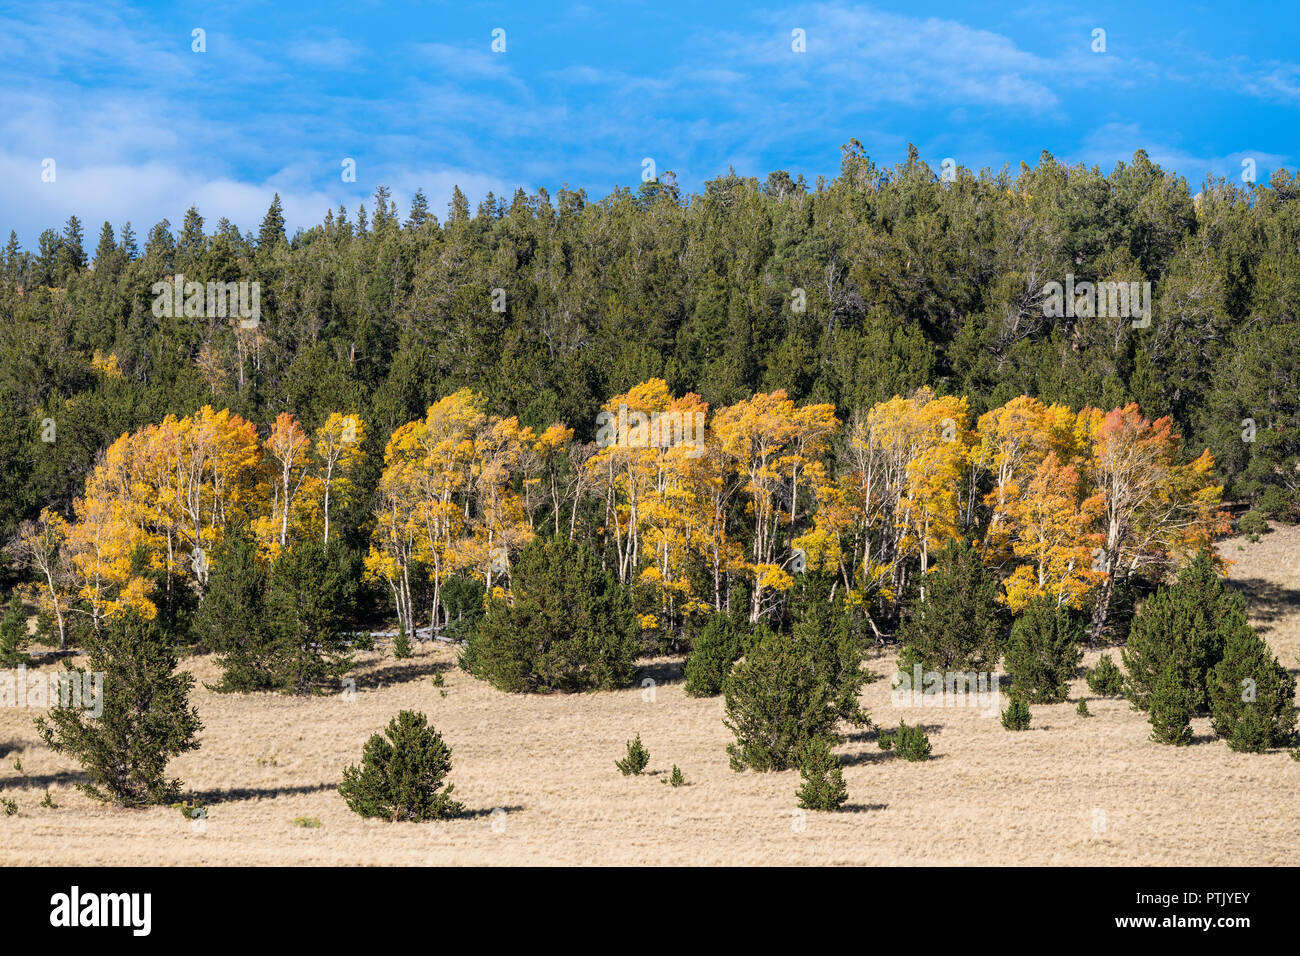 In aspen grove in autumn colors of gold, yellow, and orange contrasting with the dark green of a pine forest Stock Photo